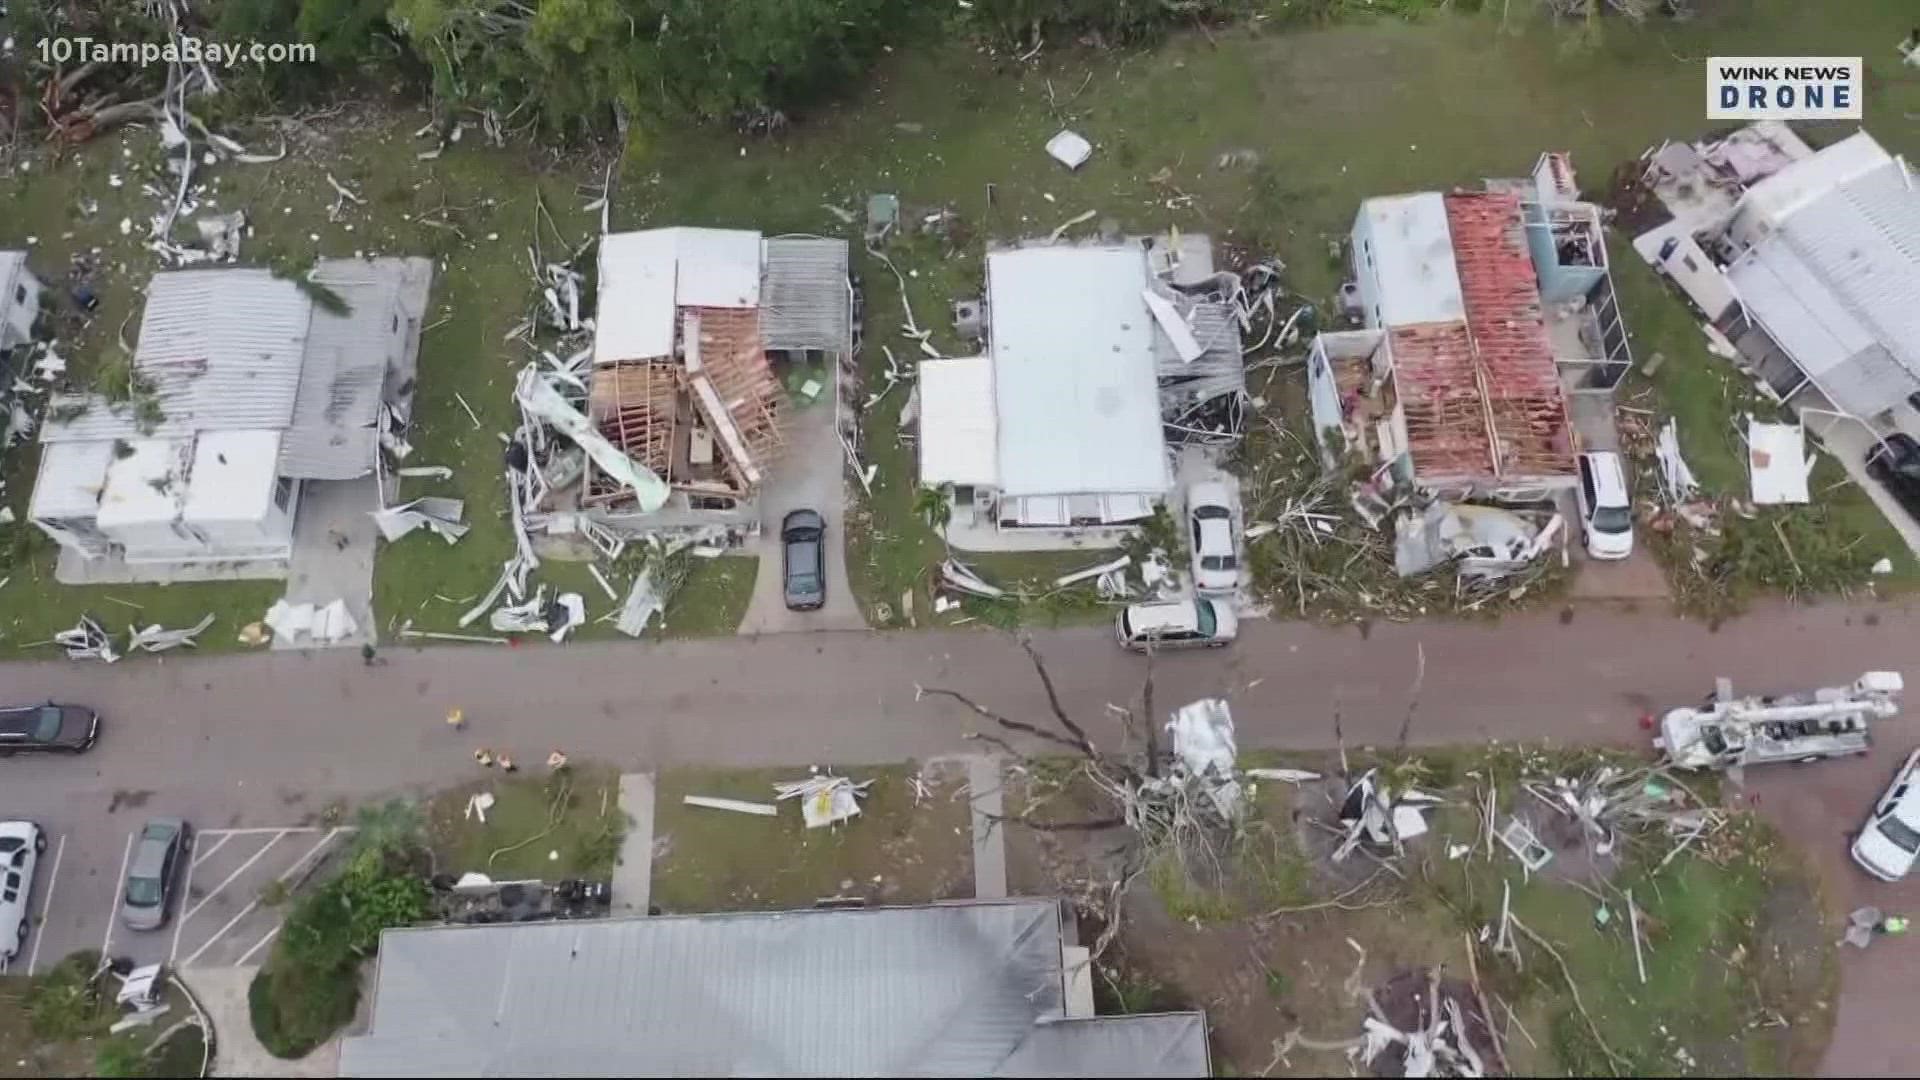 The portal comes after the federal government denied Florida's request to provide assistance to people in the Jan. 16 tornadoes.